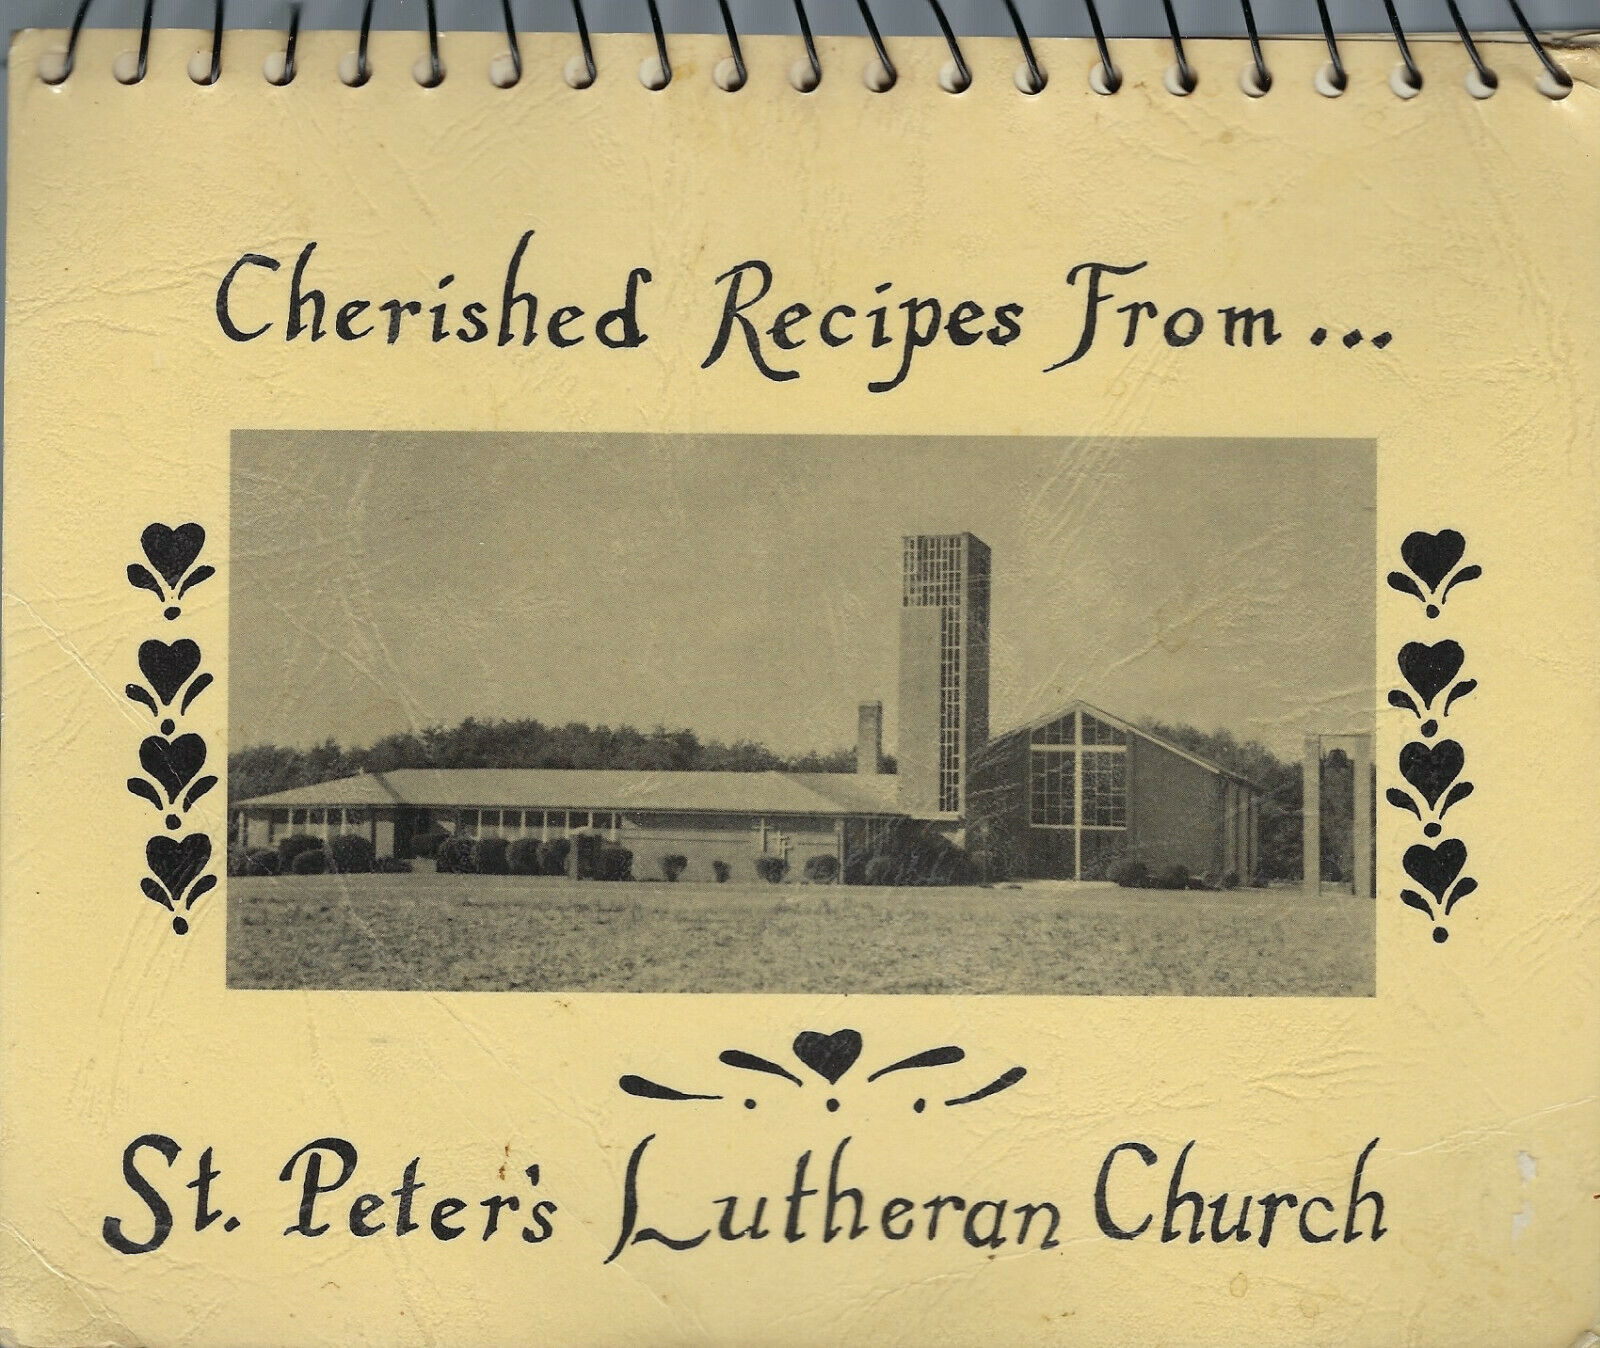 Salisbury Nc 1987 St Peter's Lutheran Church Cherished Recipes Cook Book Vintage